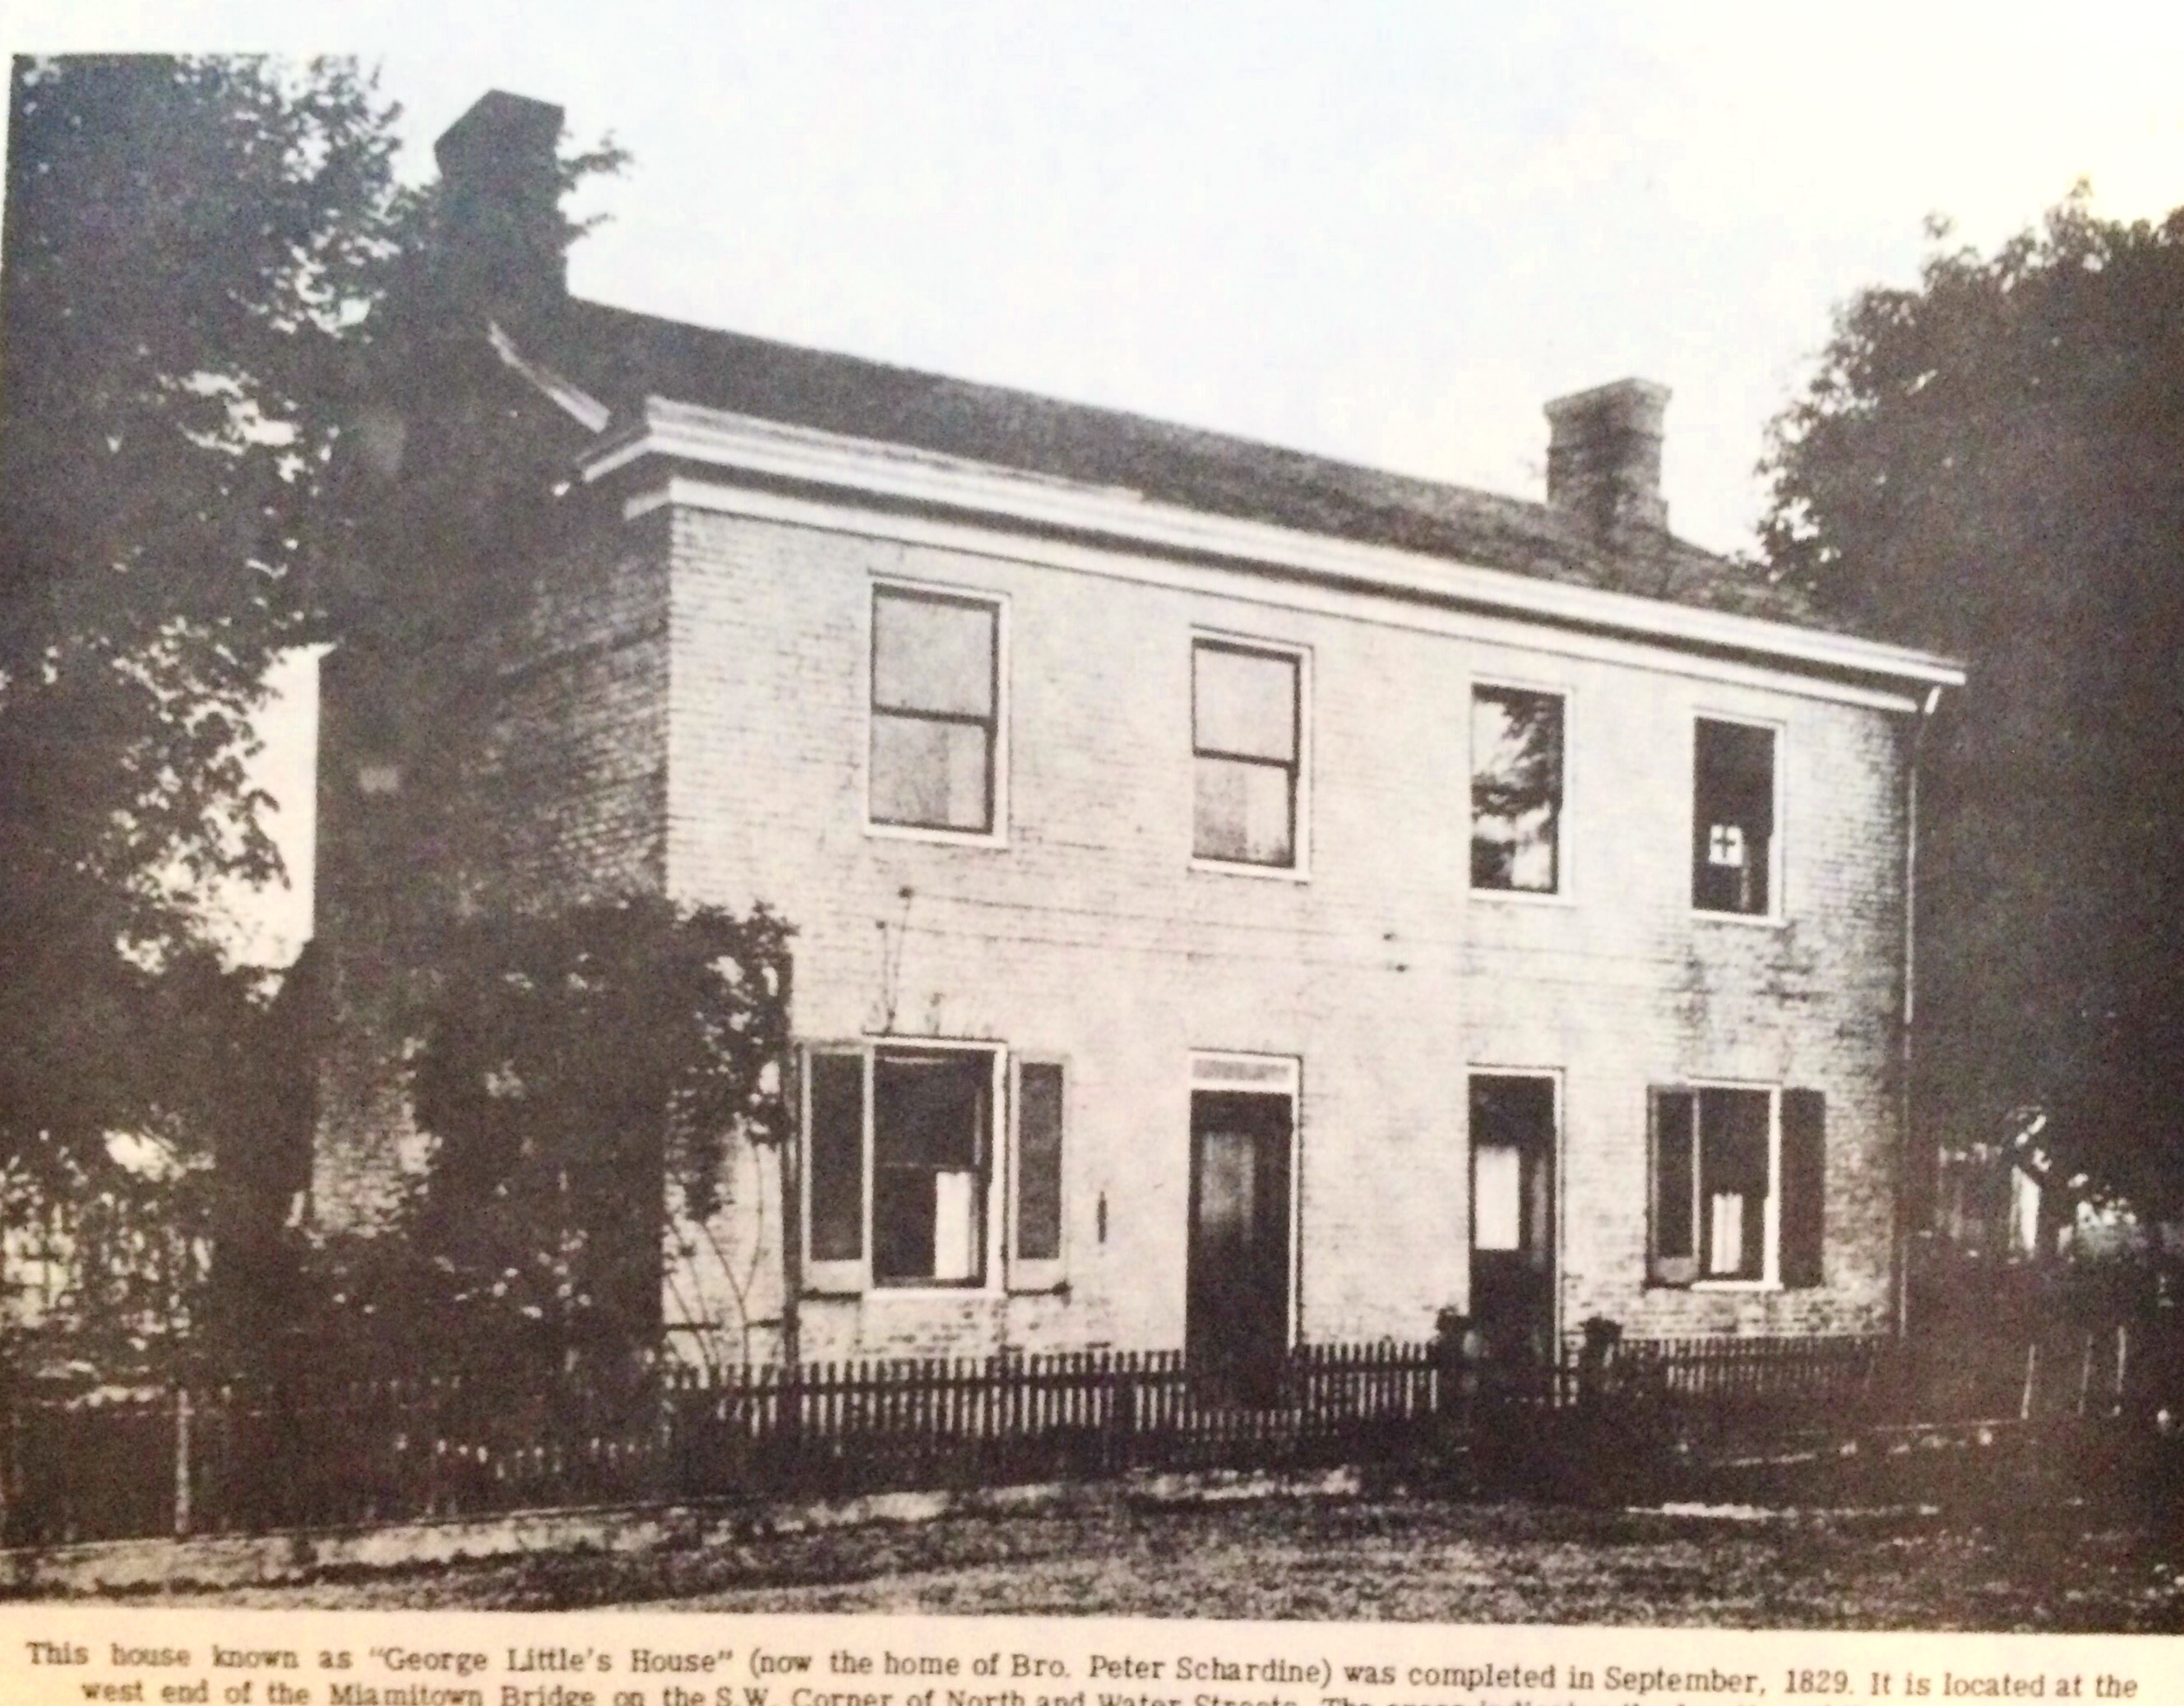 Built in 1829 in Miamitown corner of north and water streets